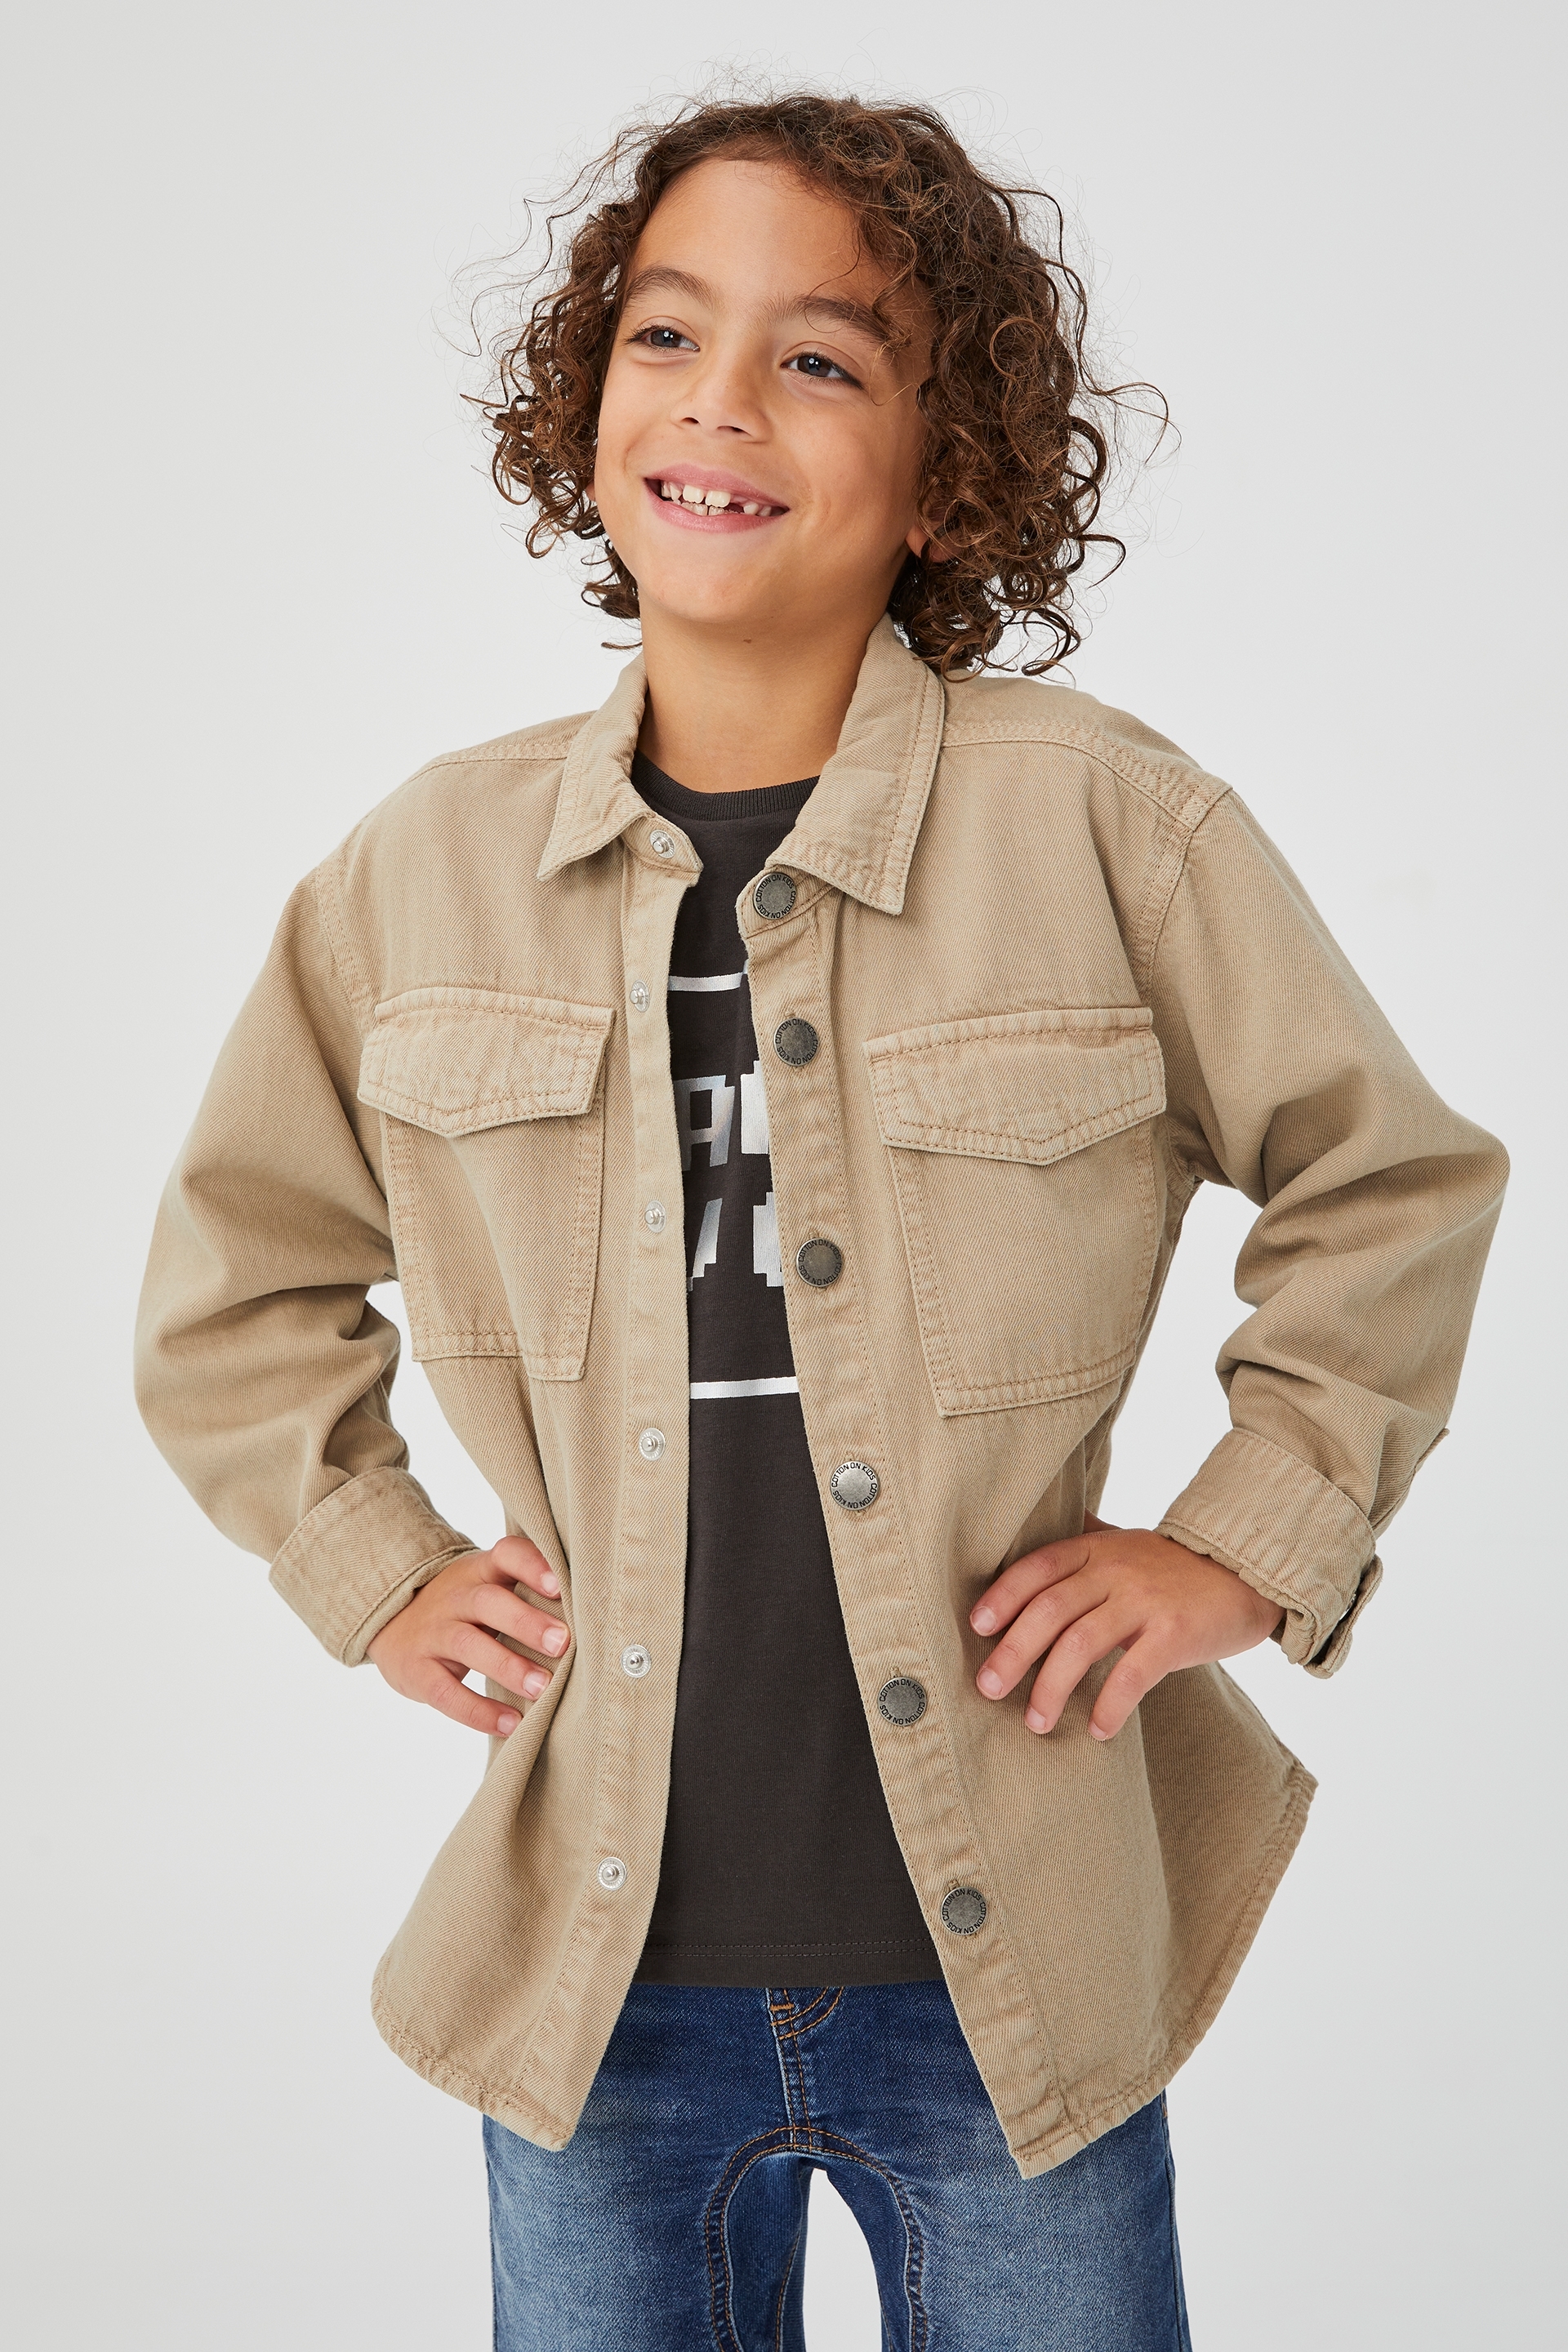 Cotton On Kids - Relaxed Fit Shacket - Bronte stone